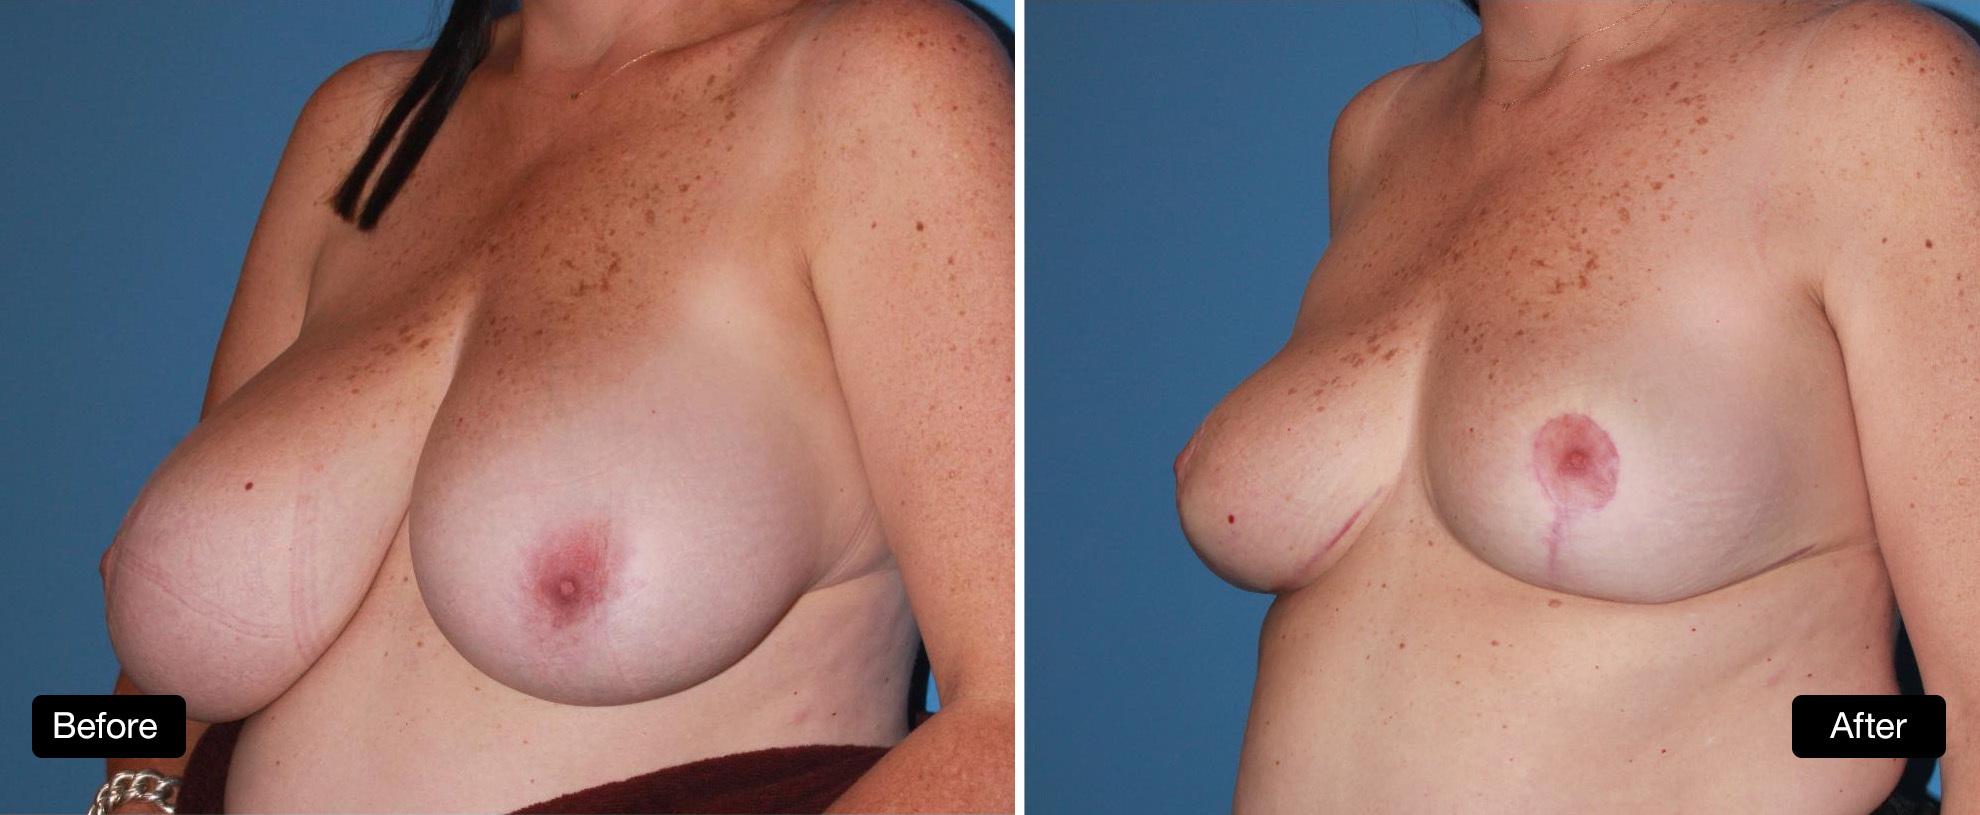 Breast reduction surgery - 48 year old with marked breast asymmetry, before and 5 months post surgery, 2a & 2b